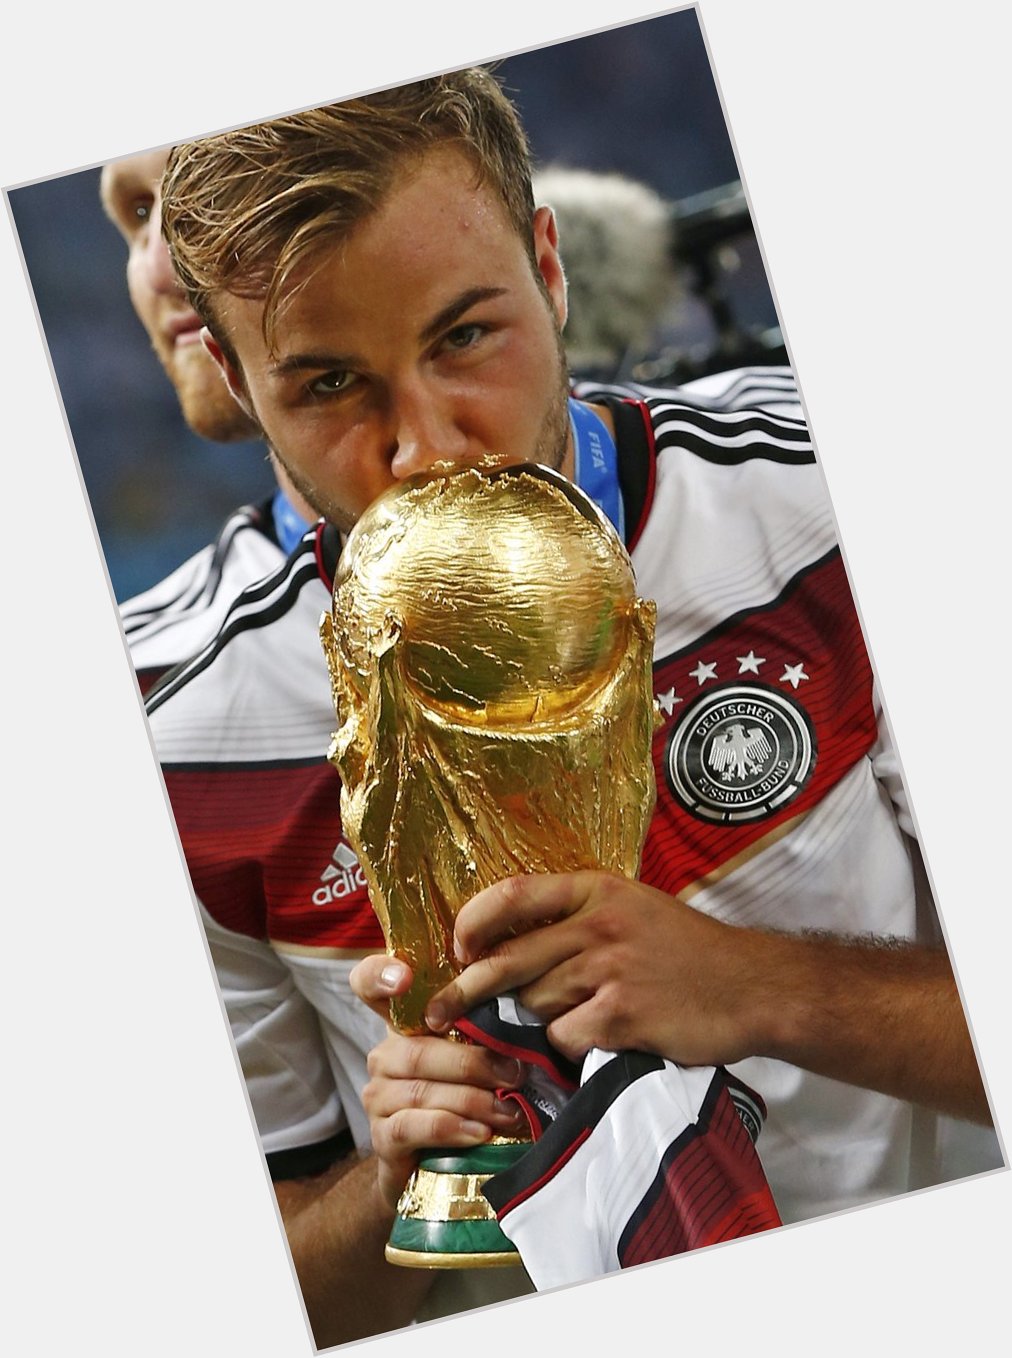 Happy Birthday to Mario Gotze!

The Dortmund forward scored the only goal in the 2014 World Cup final. 